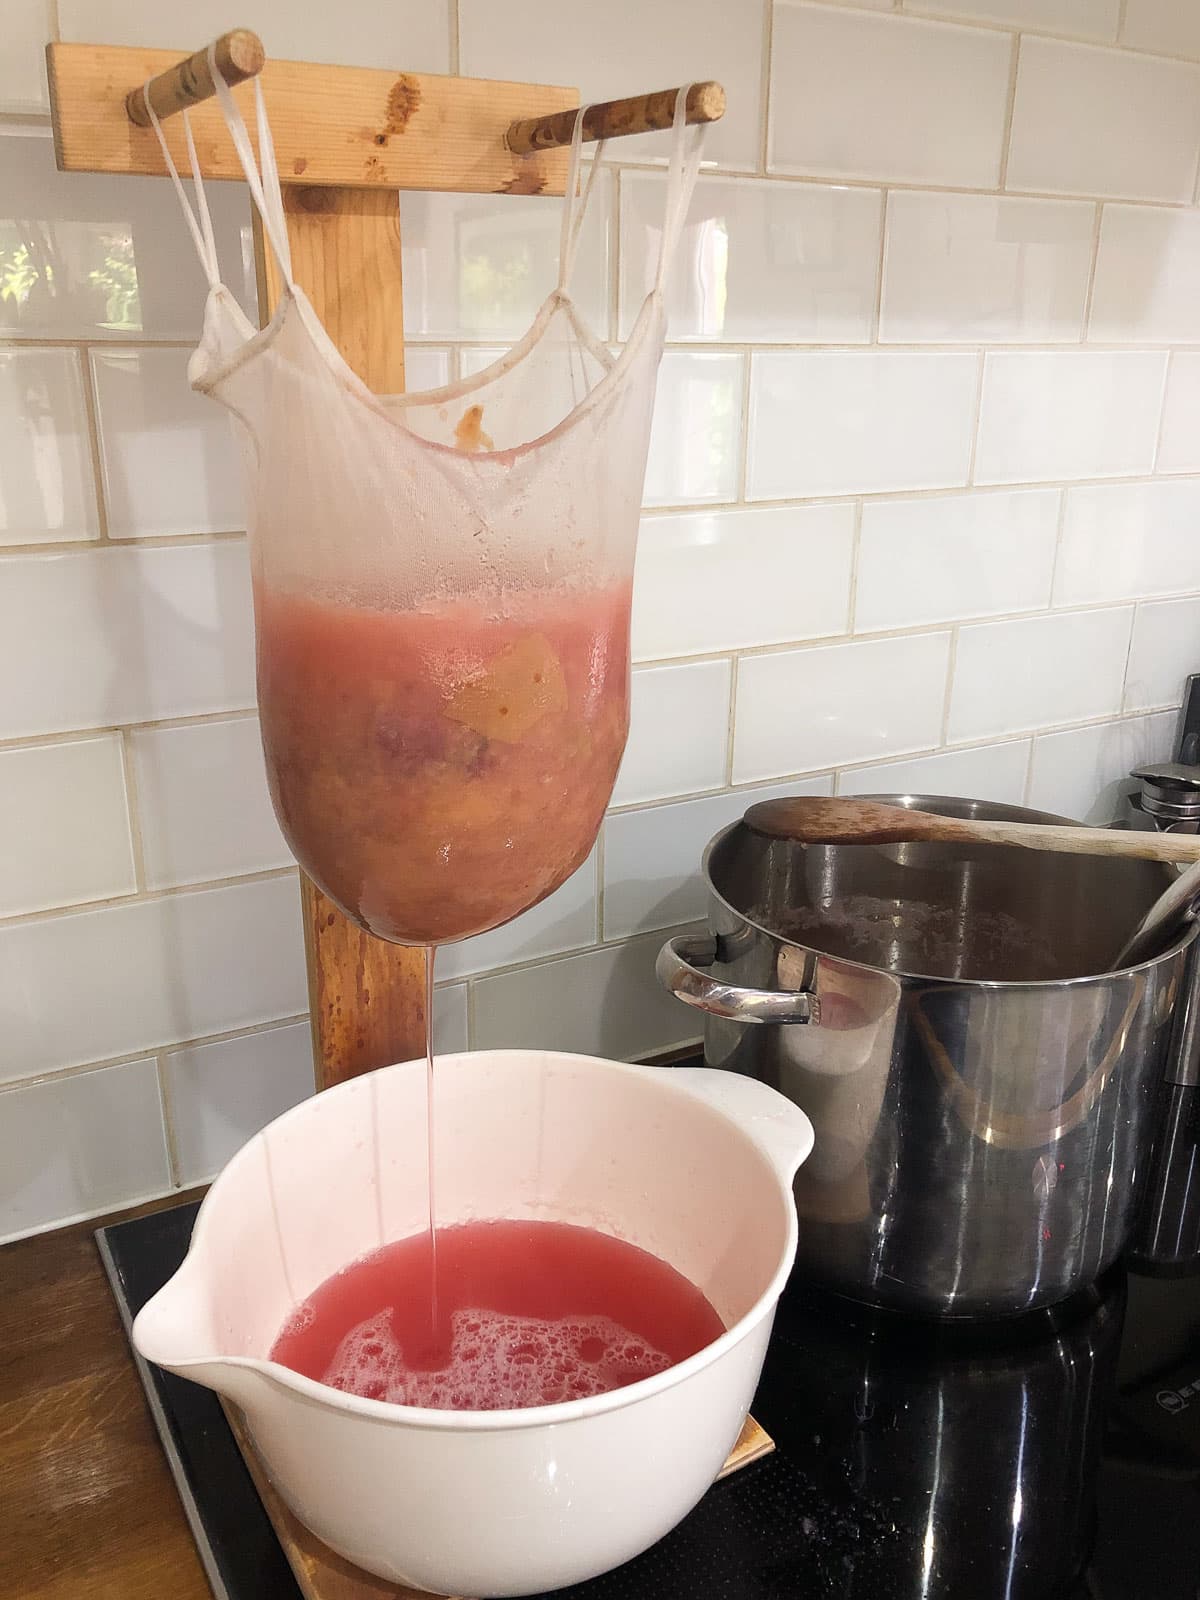 Showing the process of draining juice from cooked apples to make a jelly using a homemade jelly stand.